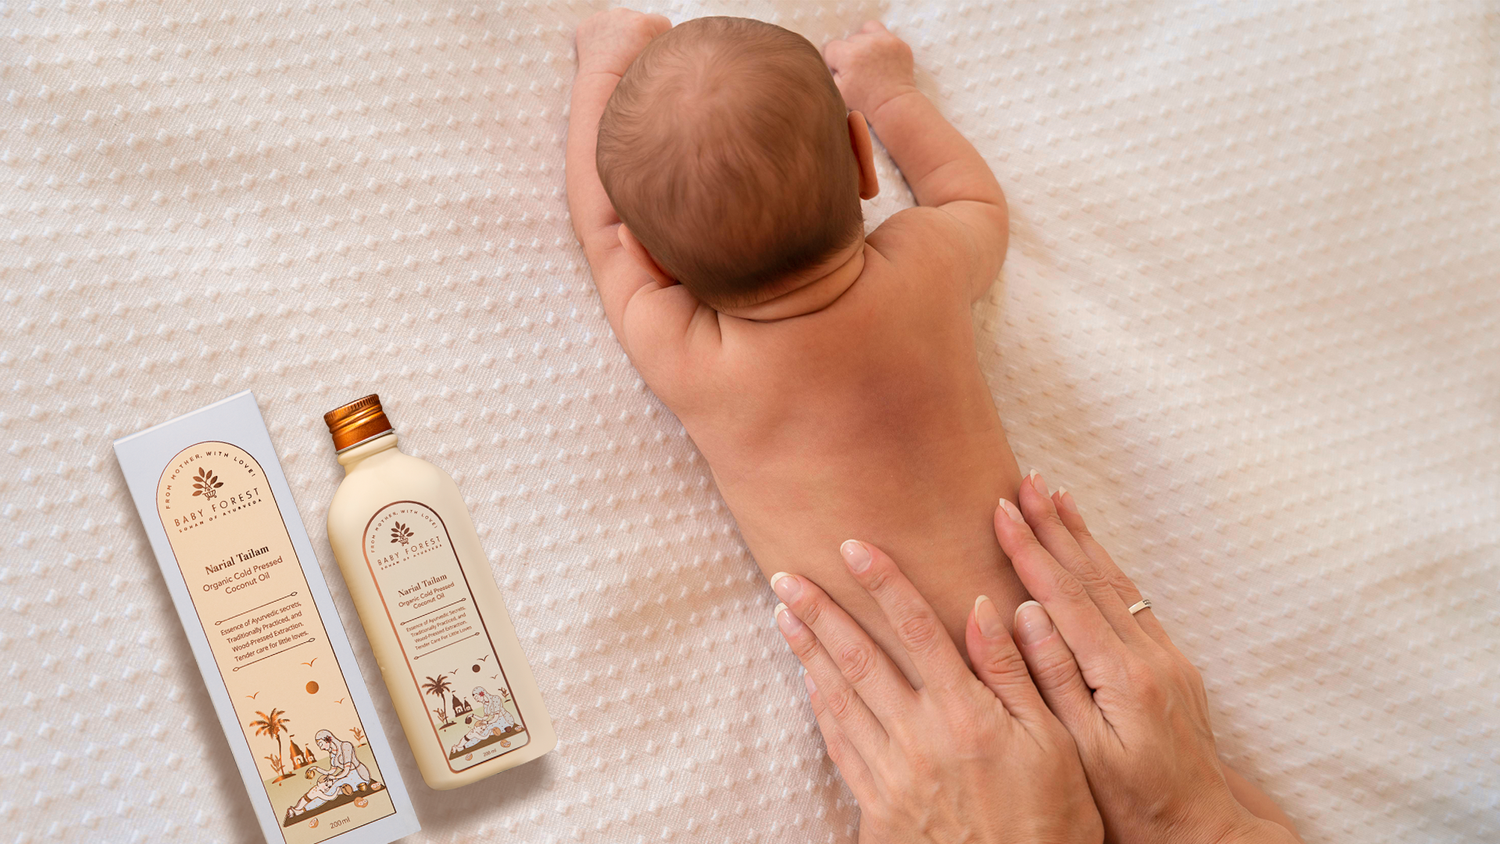 The benefits of coconut oil for nurturing baby’s delicate skin